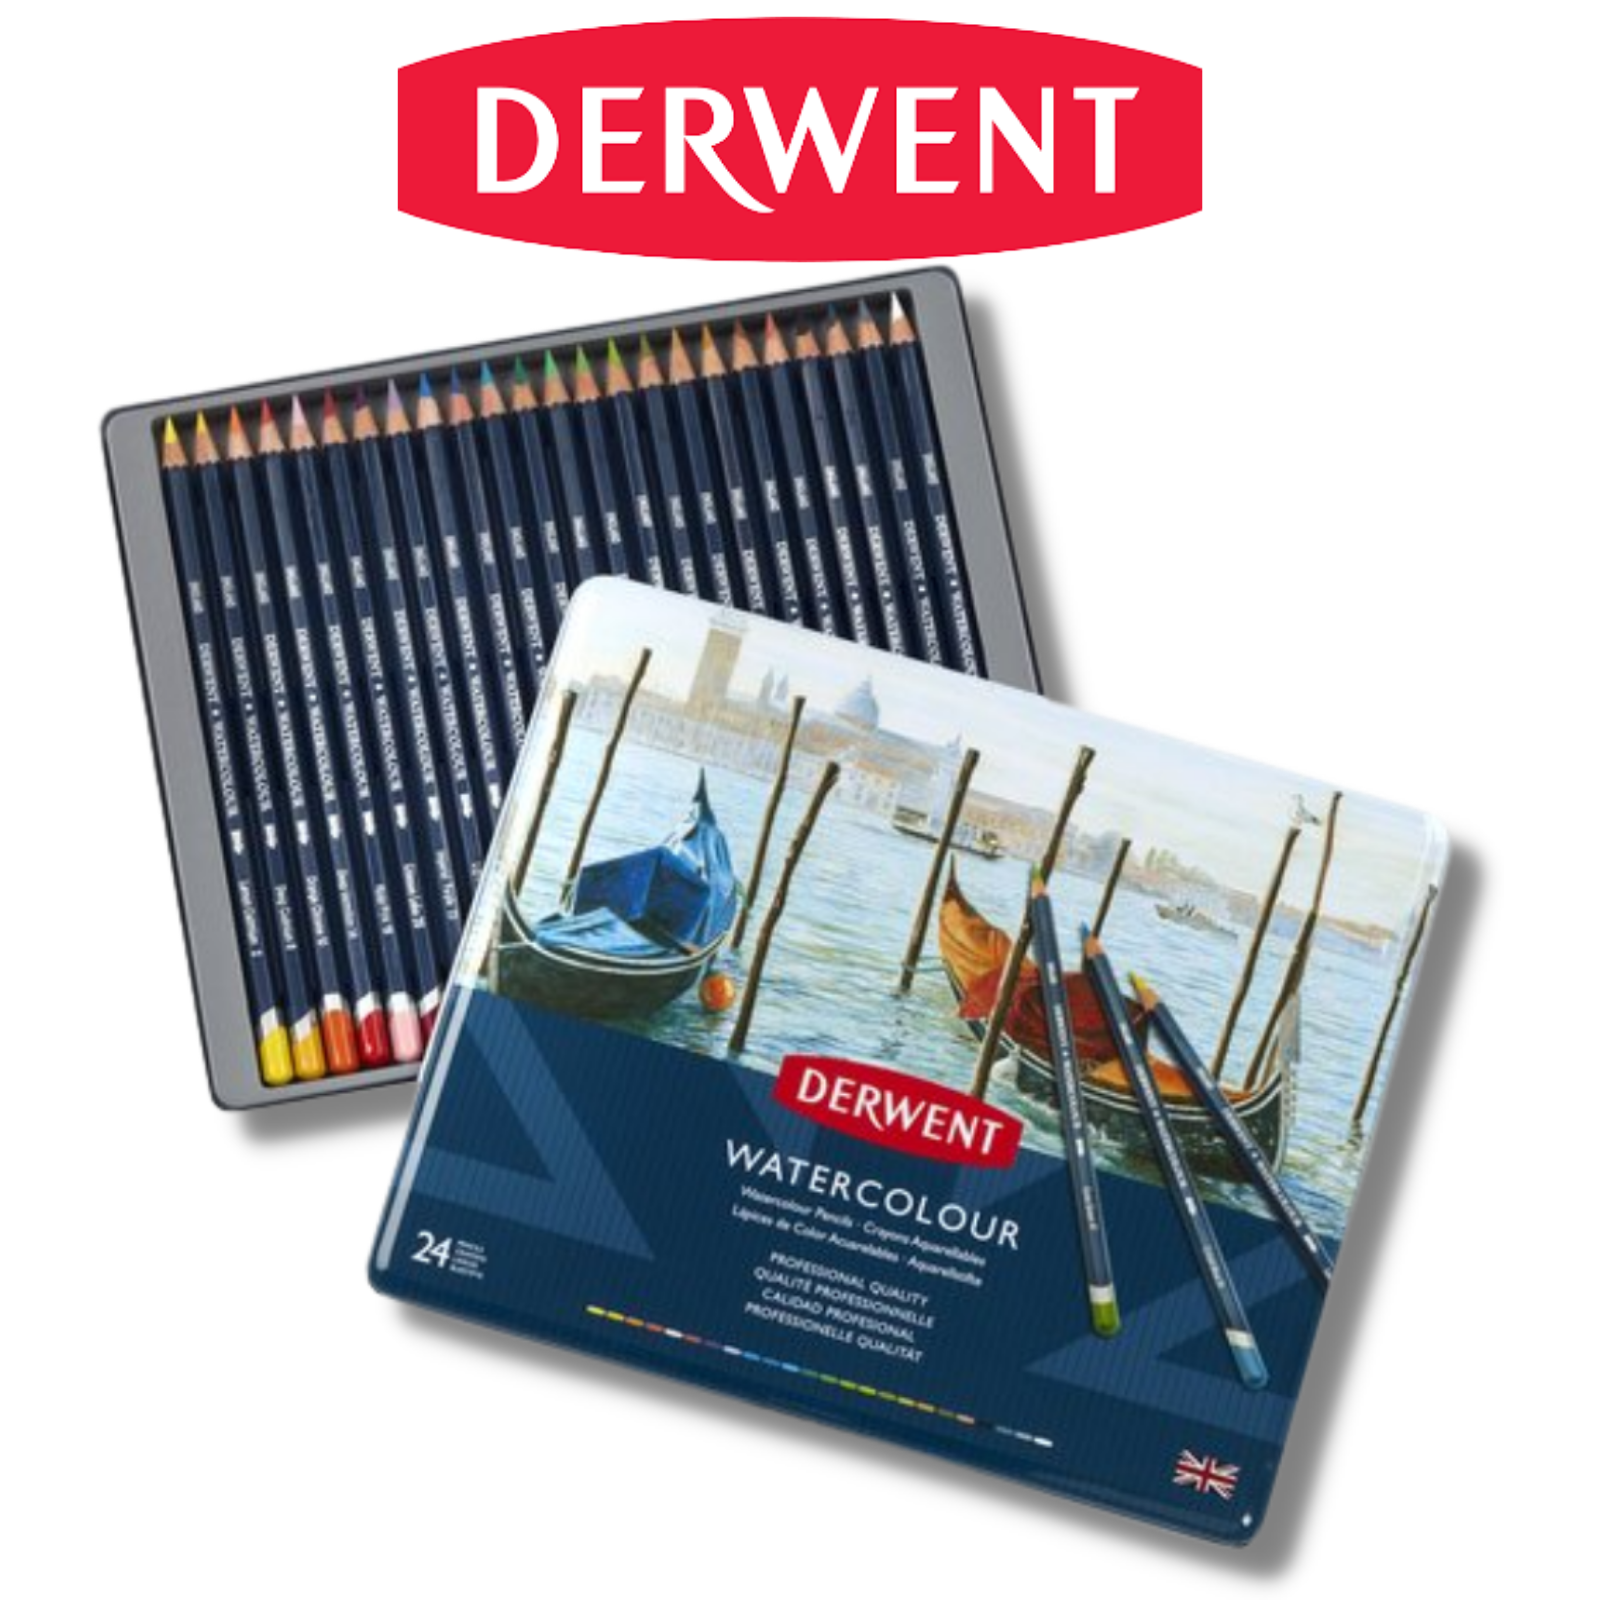 Derwent 24 Watercolour Pencils, Colouring, Blending, Layering, Drawing - Contains a full range of 24 watercolour pencils